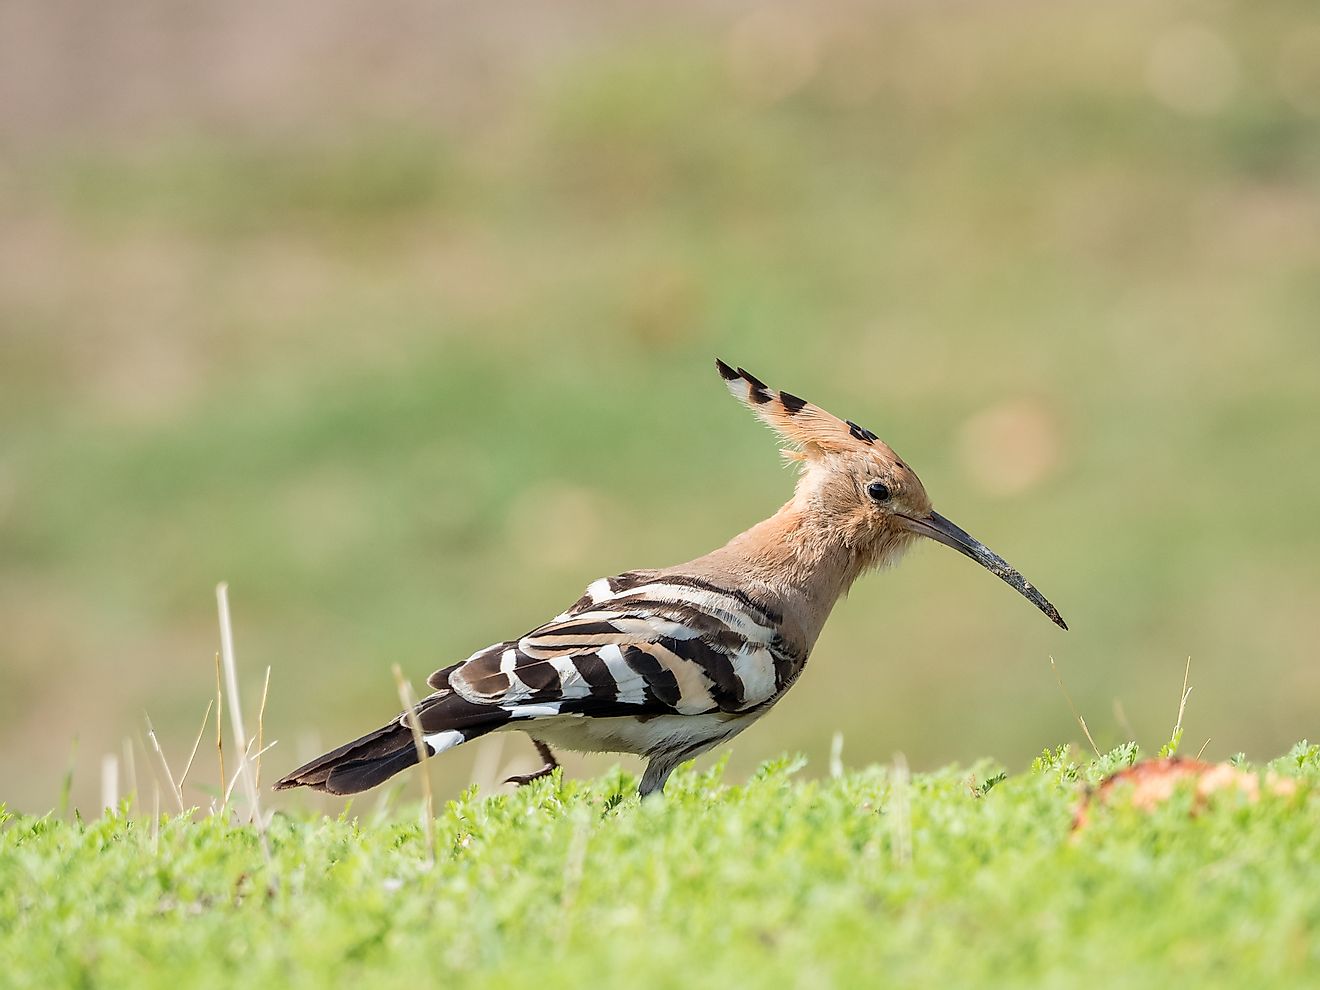 The hoopoe inhabits a wide range across the planet, including Mongolia. 